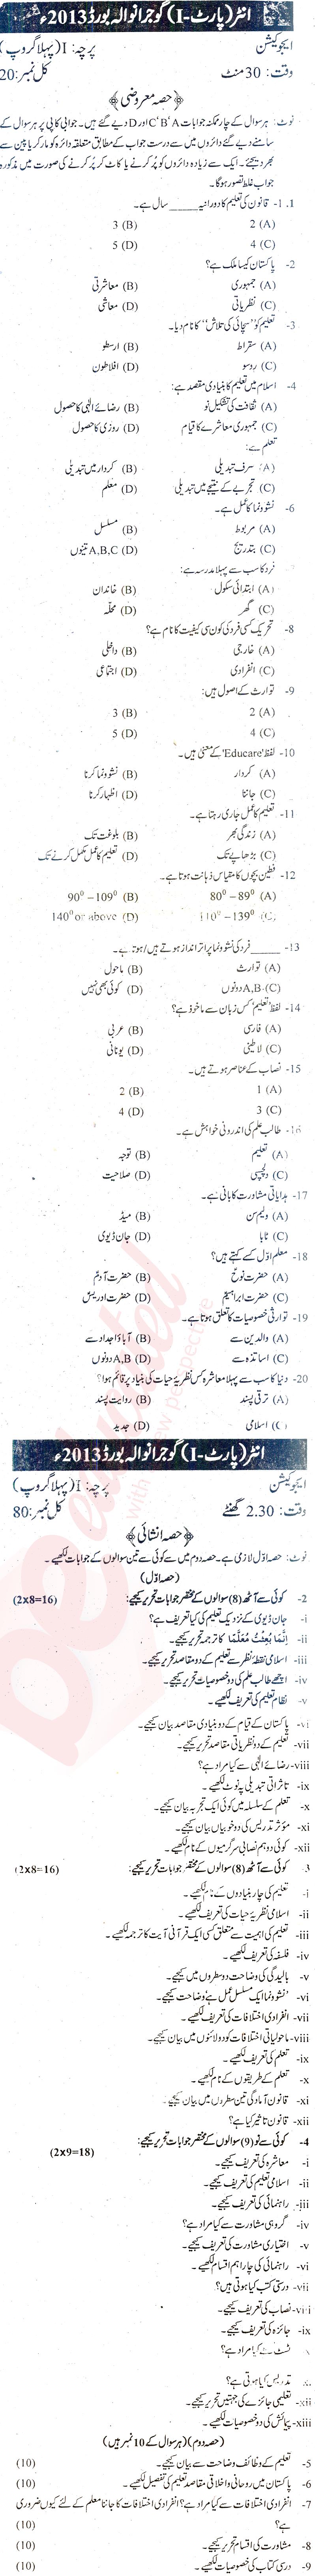 Education FA Part 1 Past Paper Group 1 BISE Gujranwala 2013